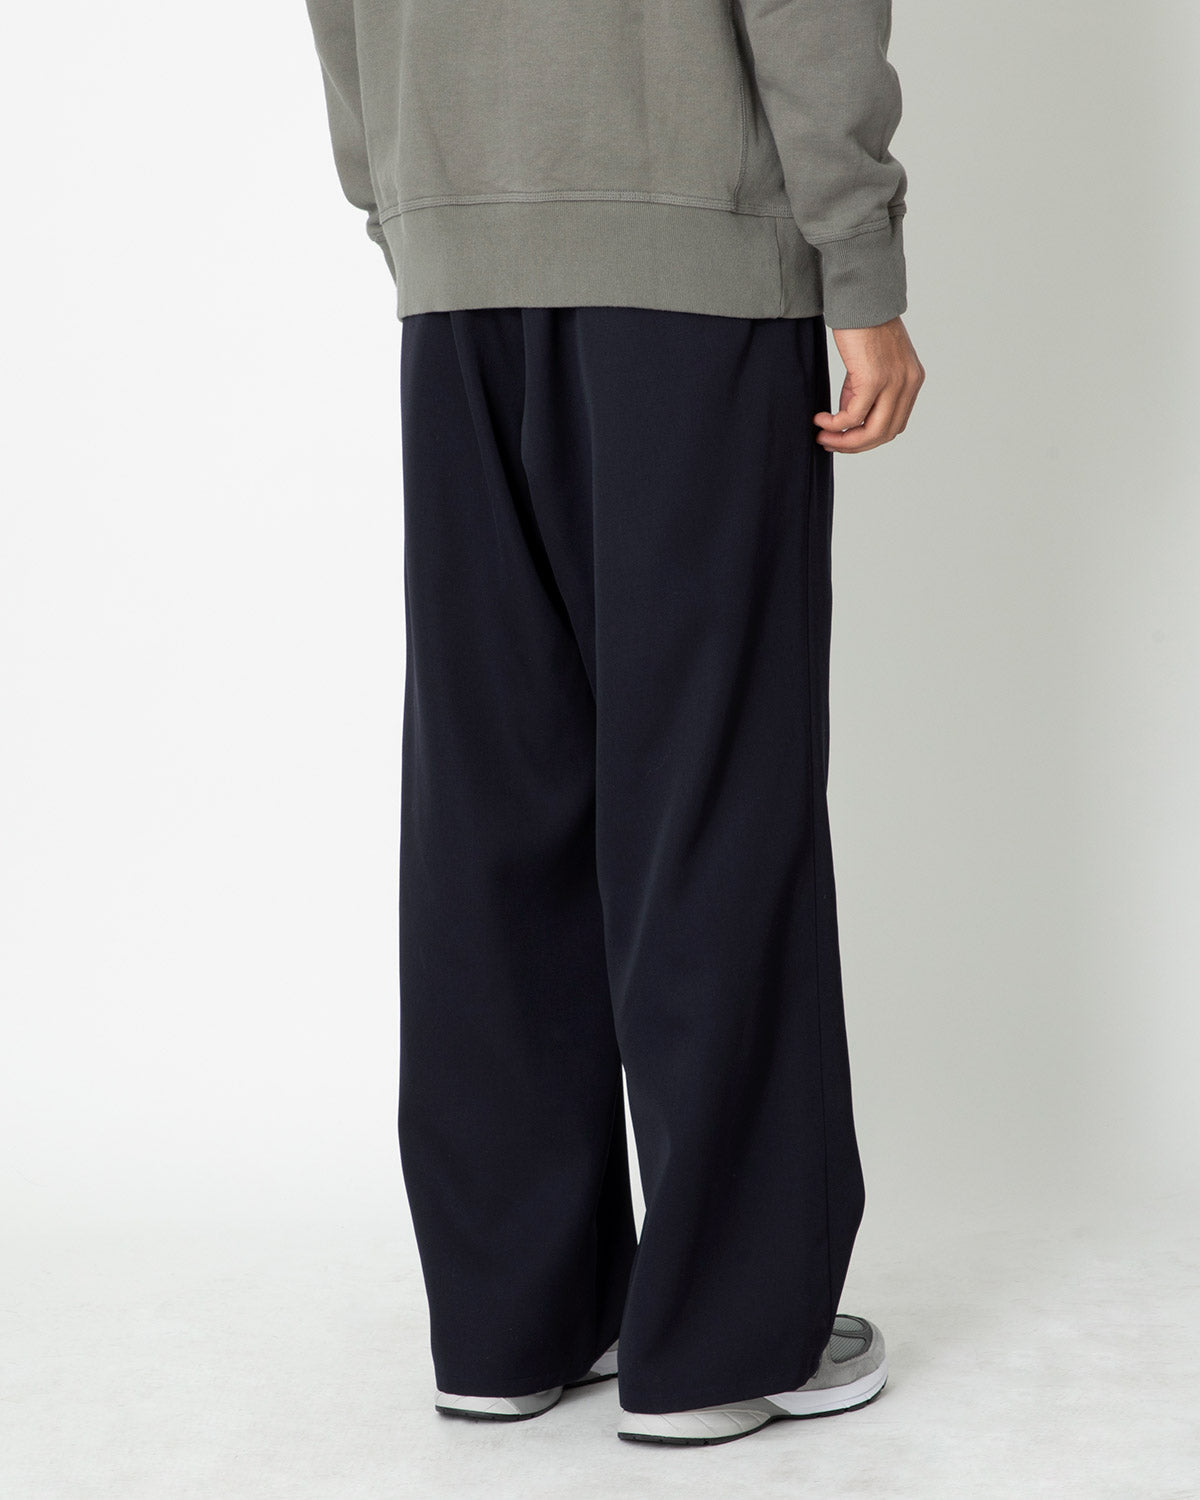 SCALE OFF WOOL WIDE CHEF PANTS